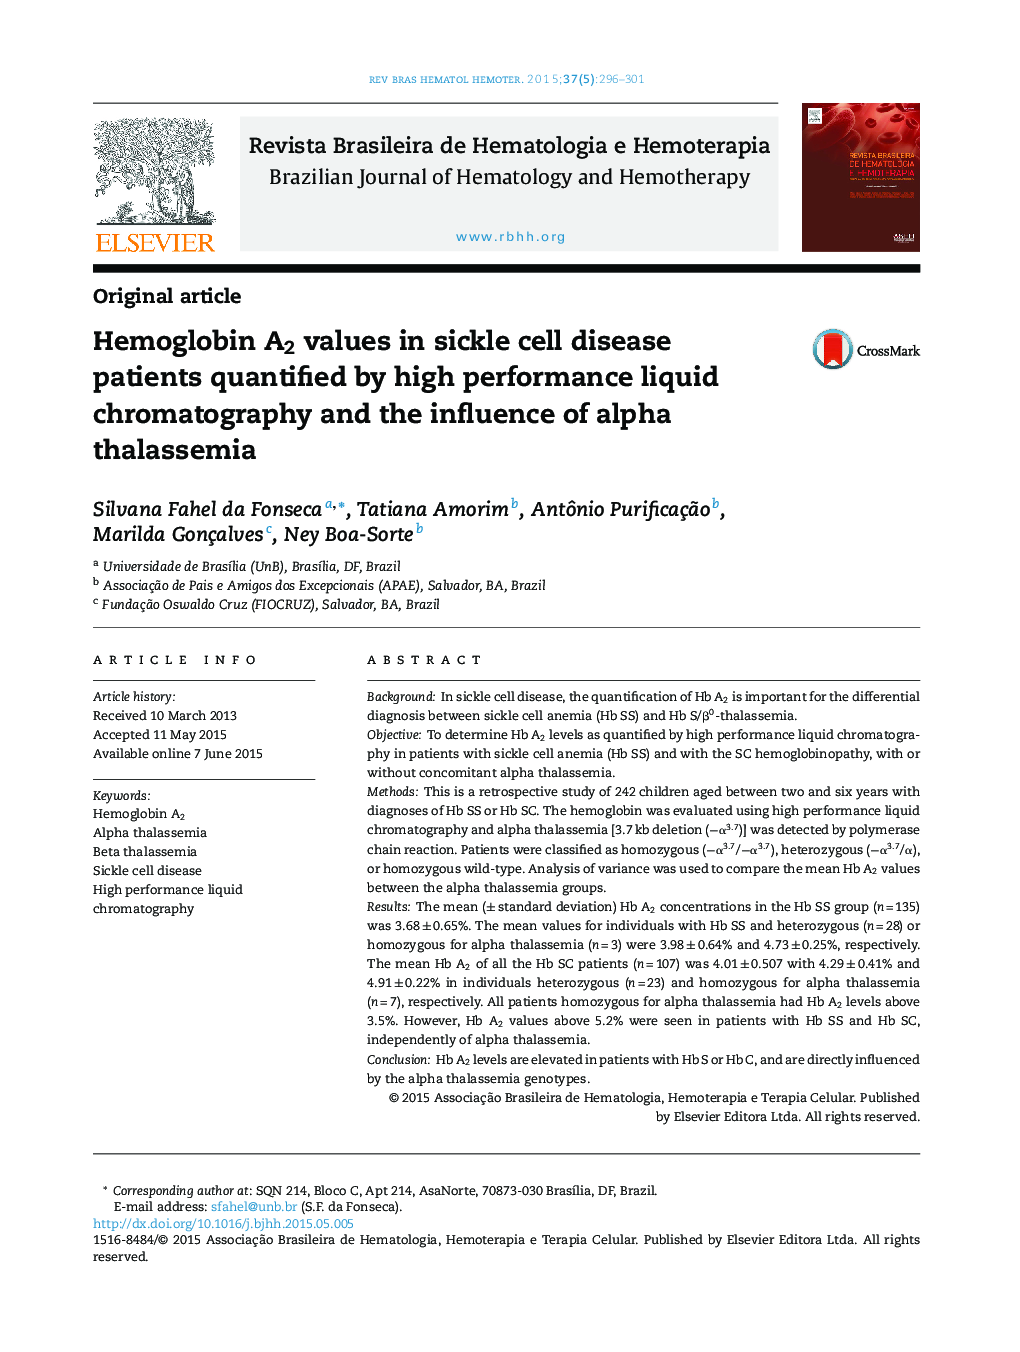 Hemoglobin A2 values in sickle cell disease patients quantified by high performance liquid chromatography and the influence of alpha thalassemia